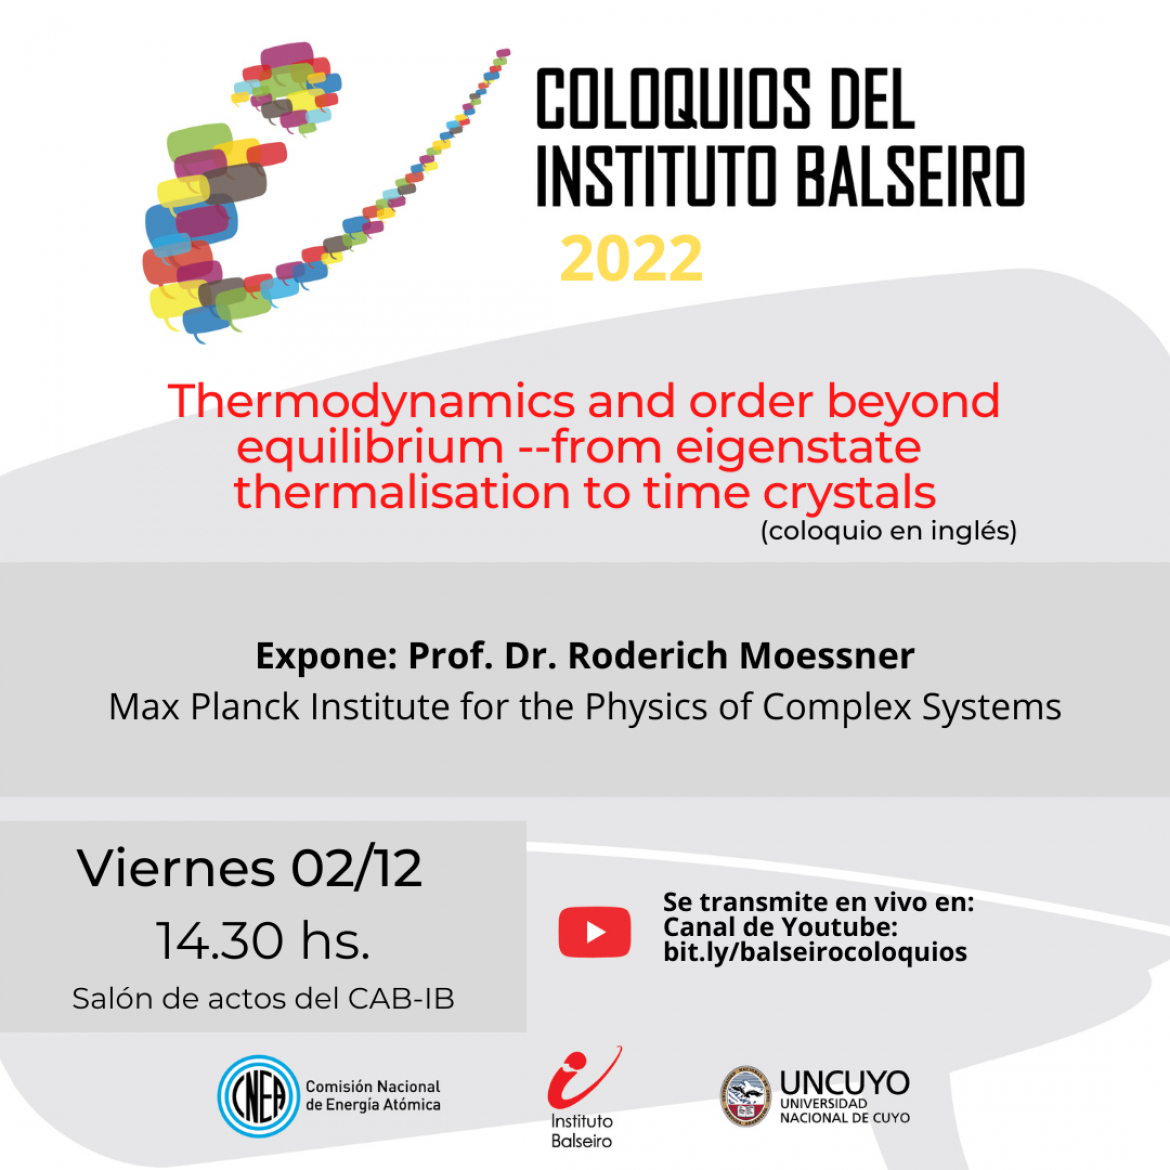 COLOQUIO DEL 02/12: Thermodynamics and order beyond equilibrium --from eigenstate thermalisation to time crystals